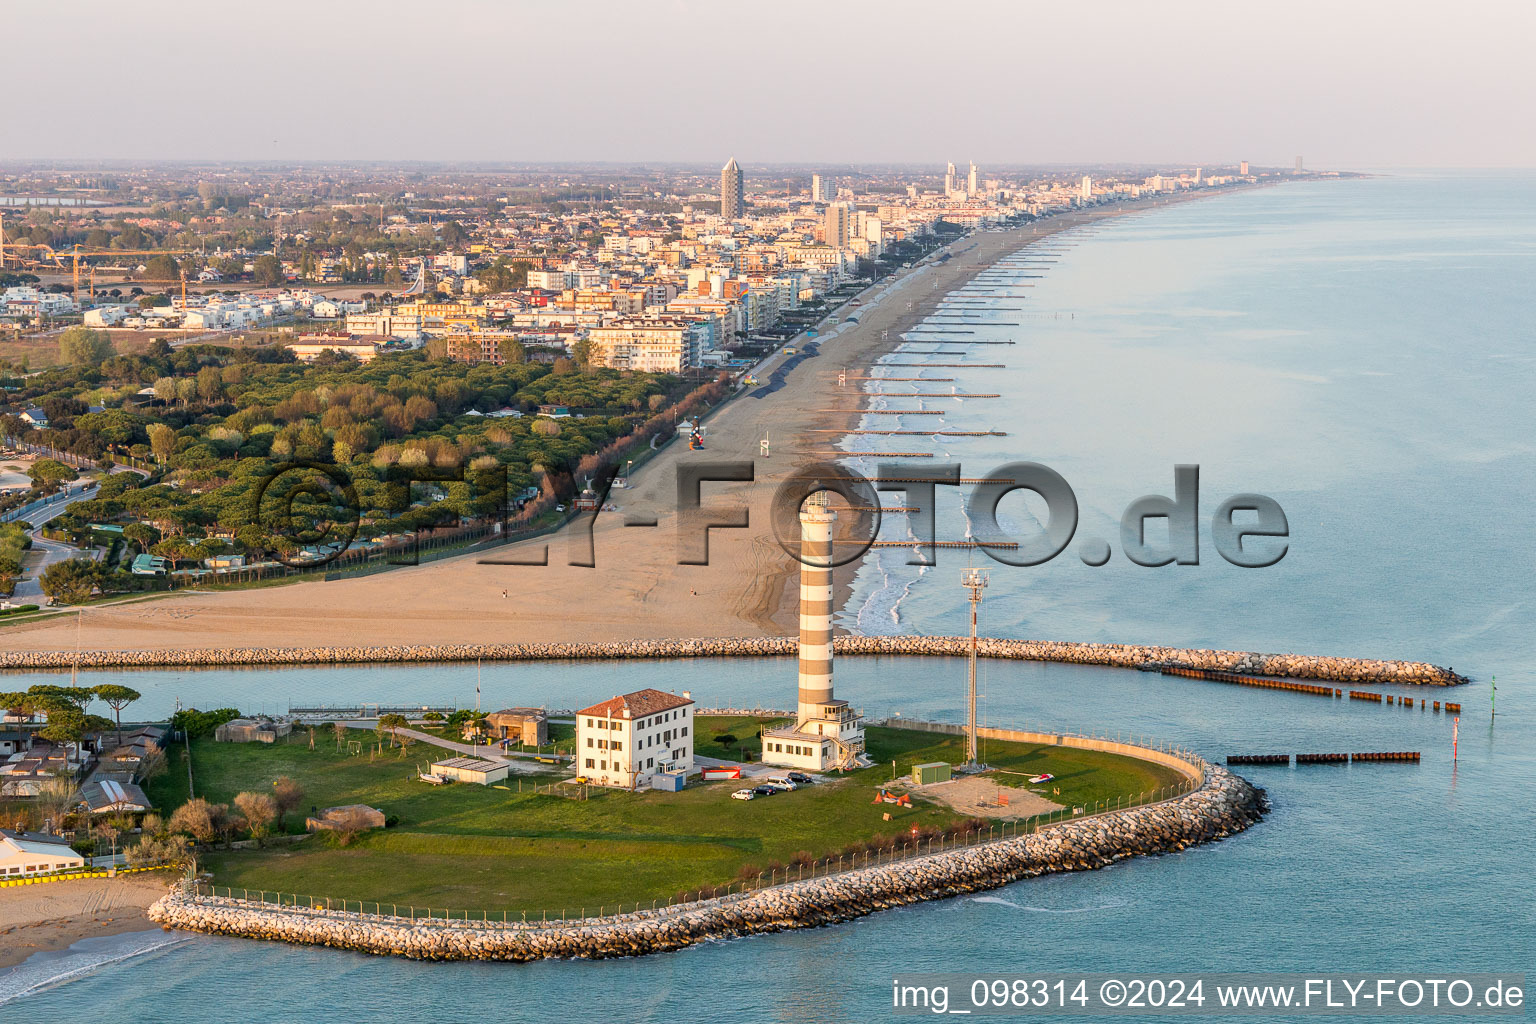 Light House Faro di Piave Vecchiaas a historic seafaring character in the coastal area of Adria in Lido di Jesolo in Venetien, Italy out of the air